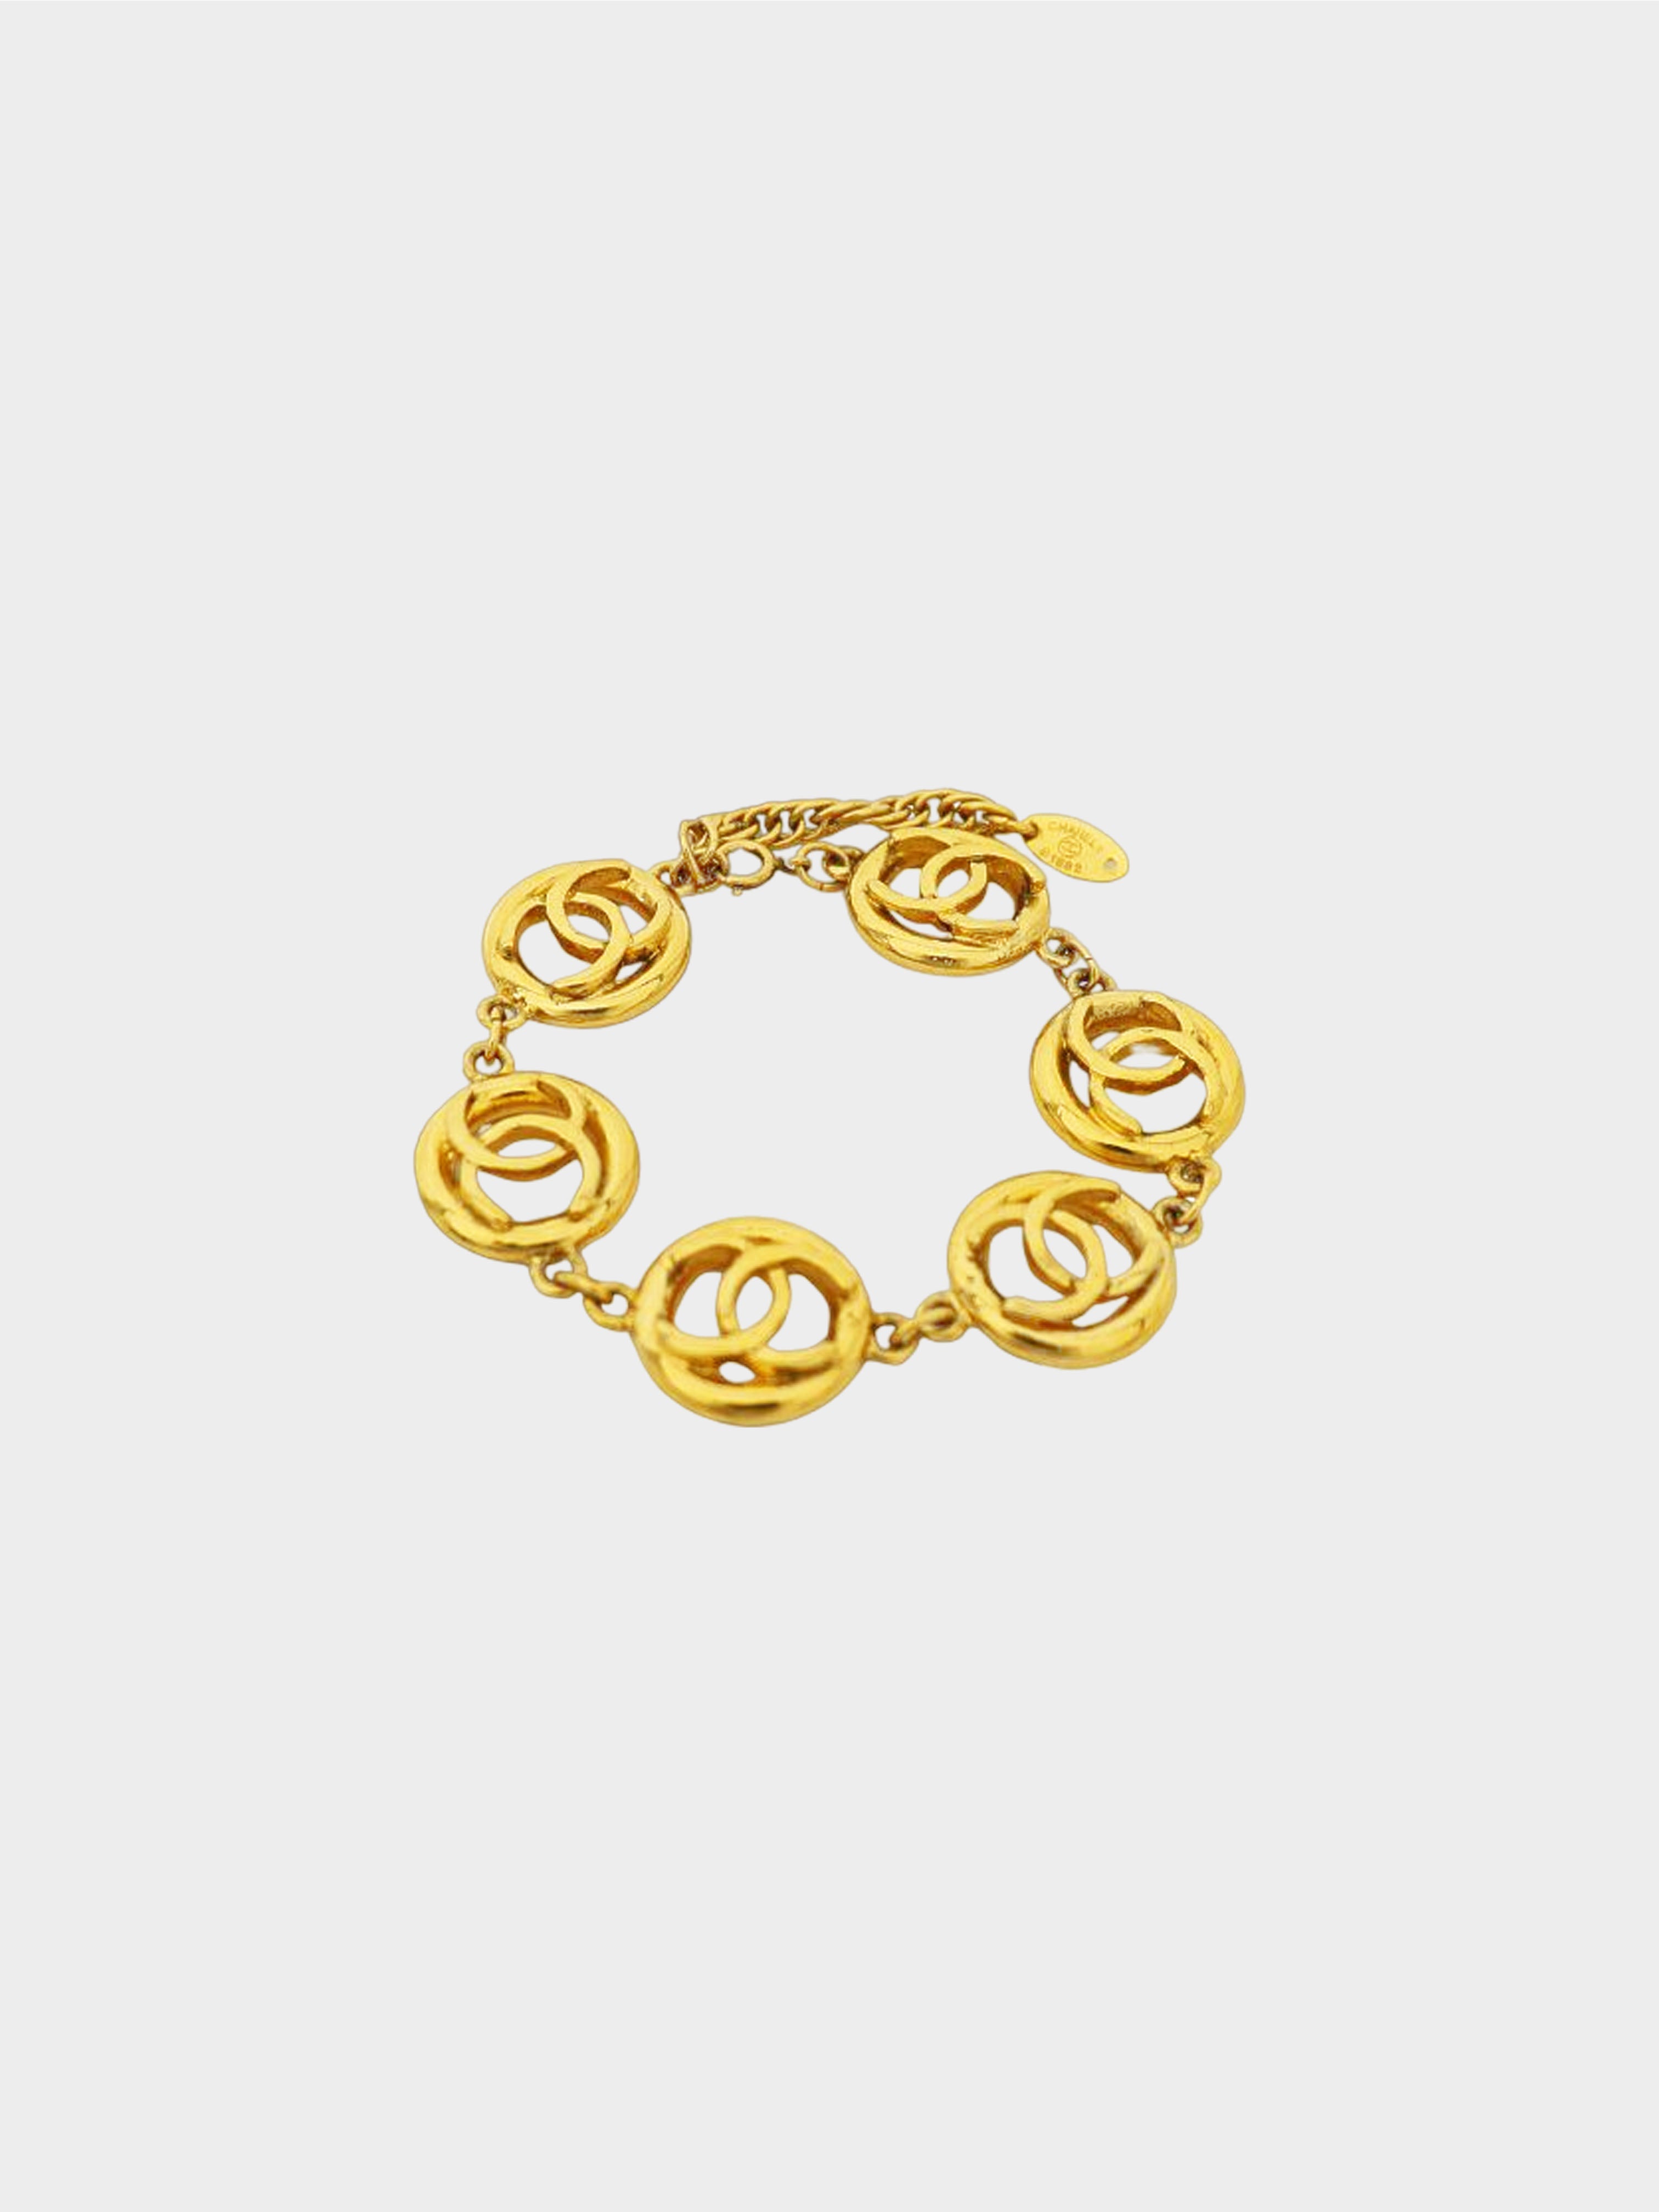 Chanel Vintage Classic Gold Toned Chain Cuff Bracelet For Sale at 1stDibs |  chanel chain bracelet, chanel gold bracelet cuff, vintage chanel cuff  bracelet